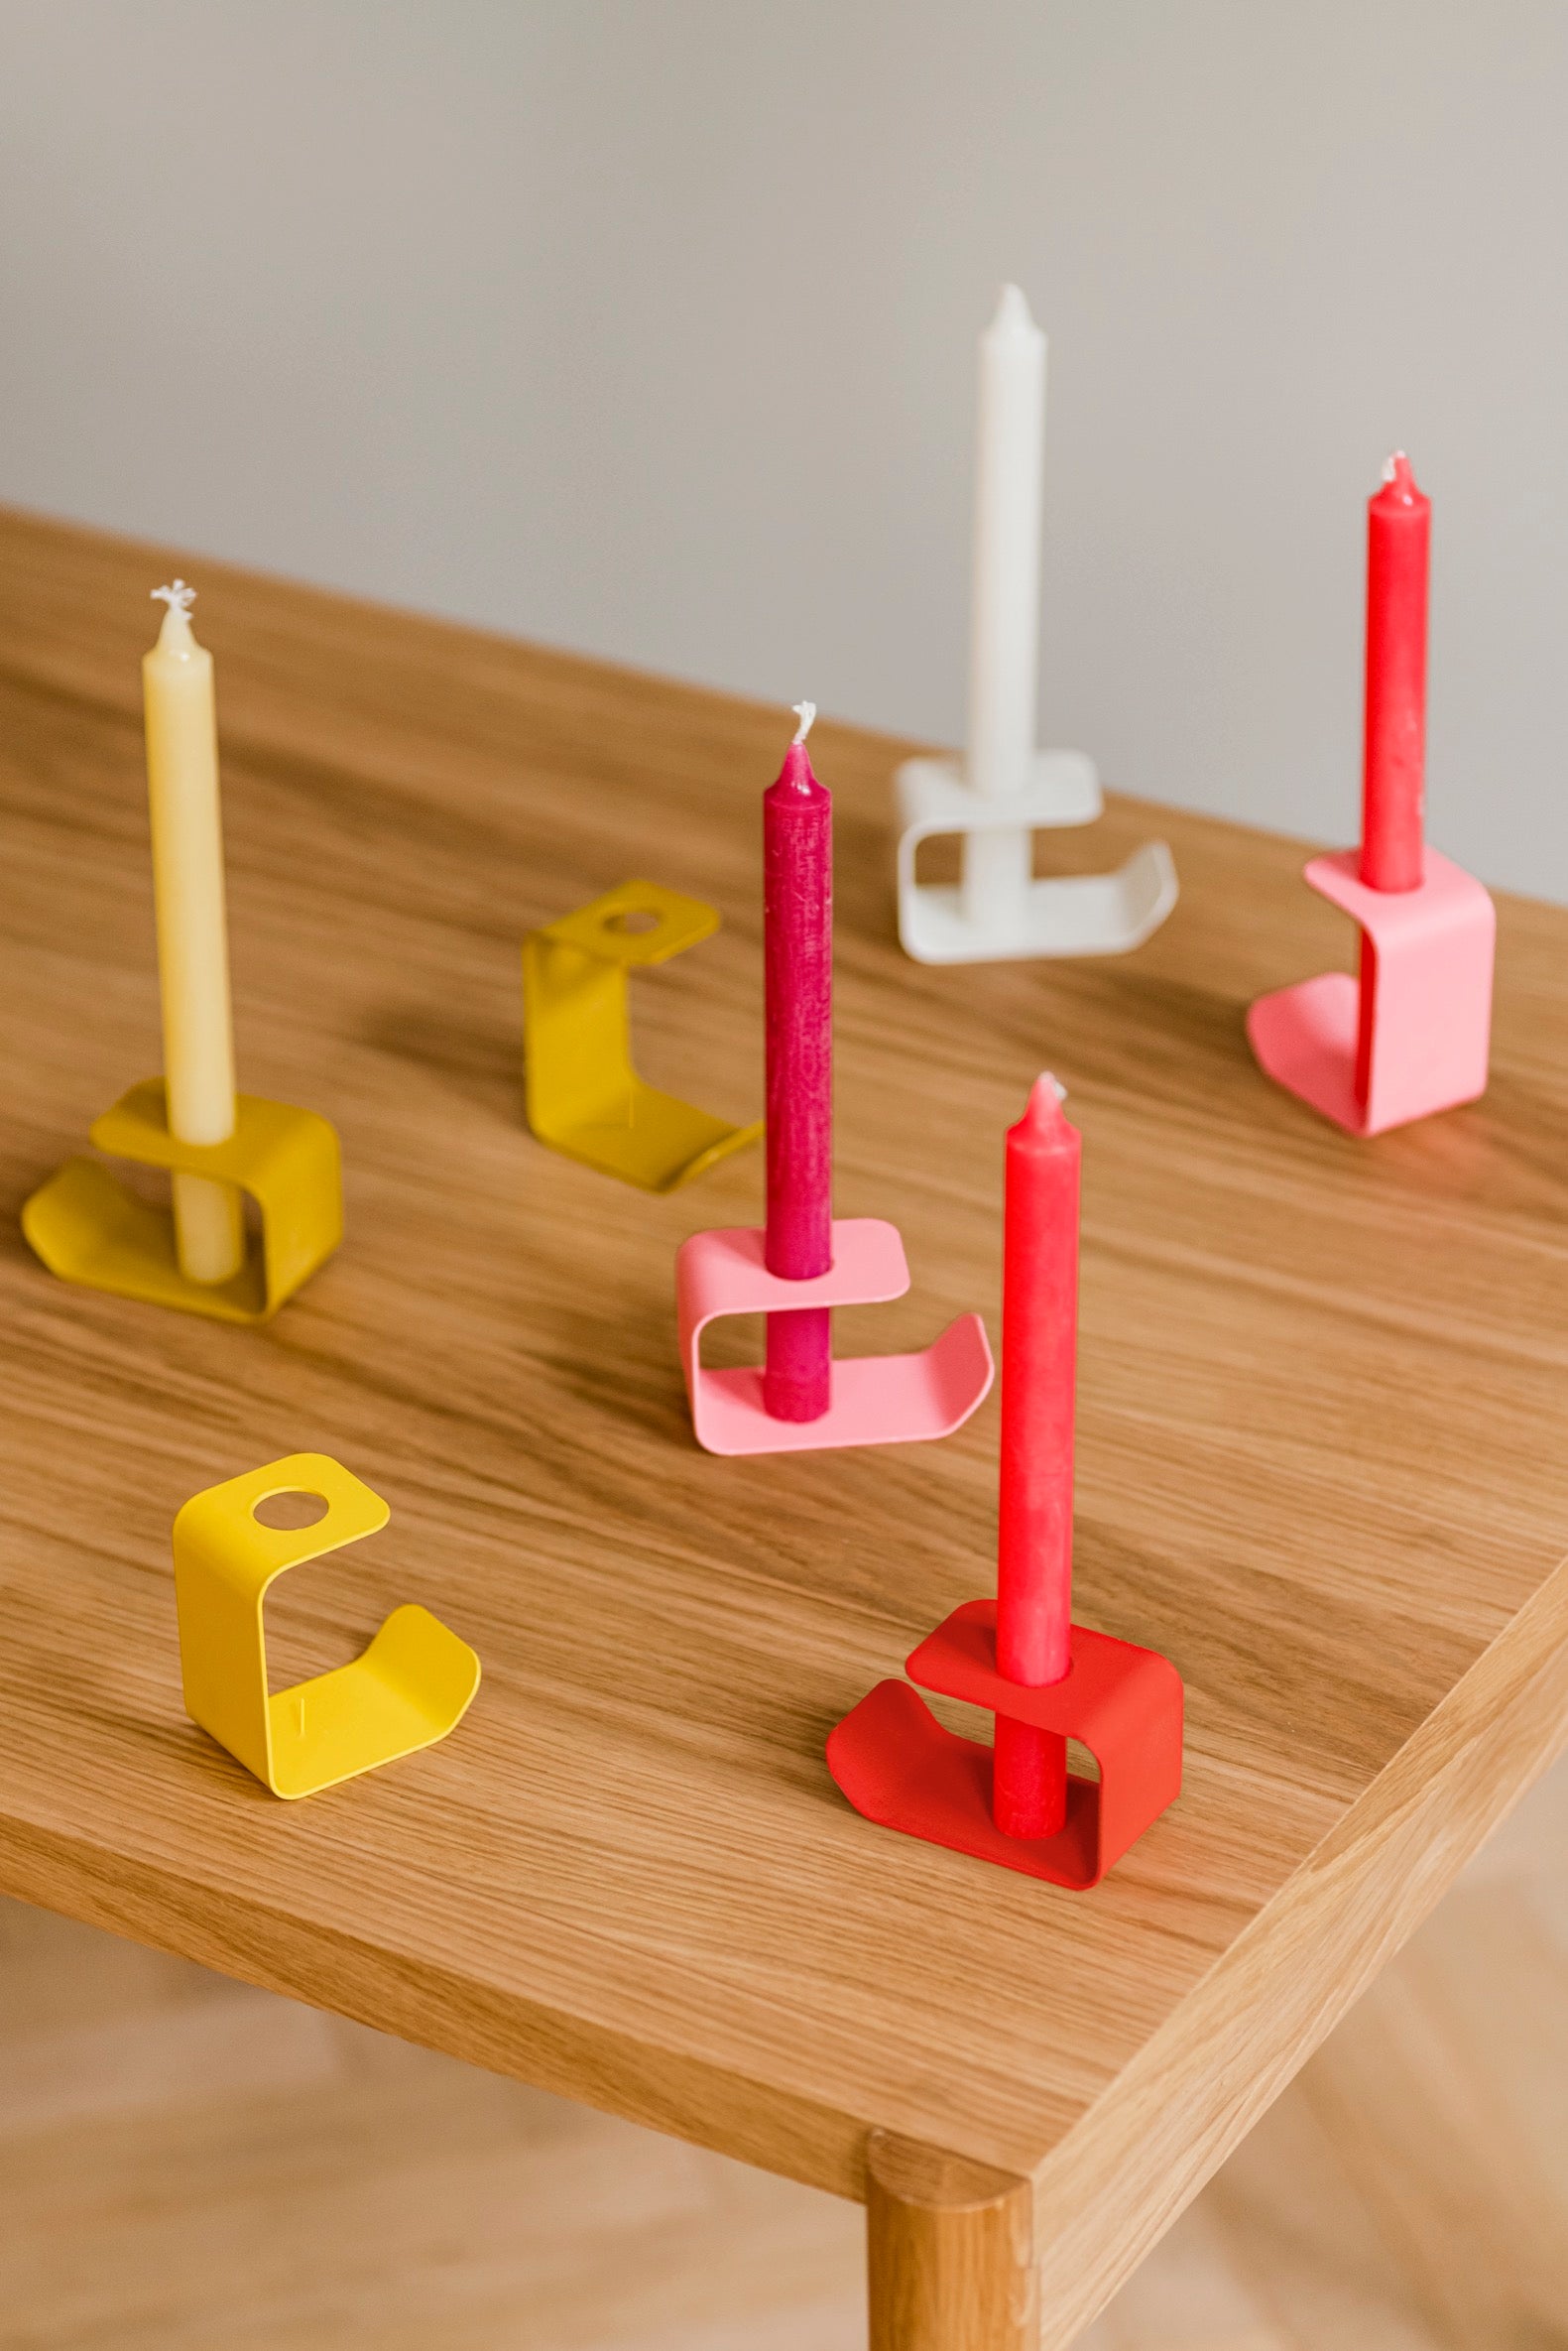 Flec Candle Holder - tall